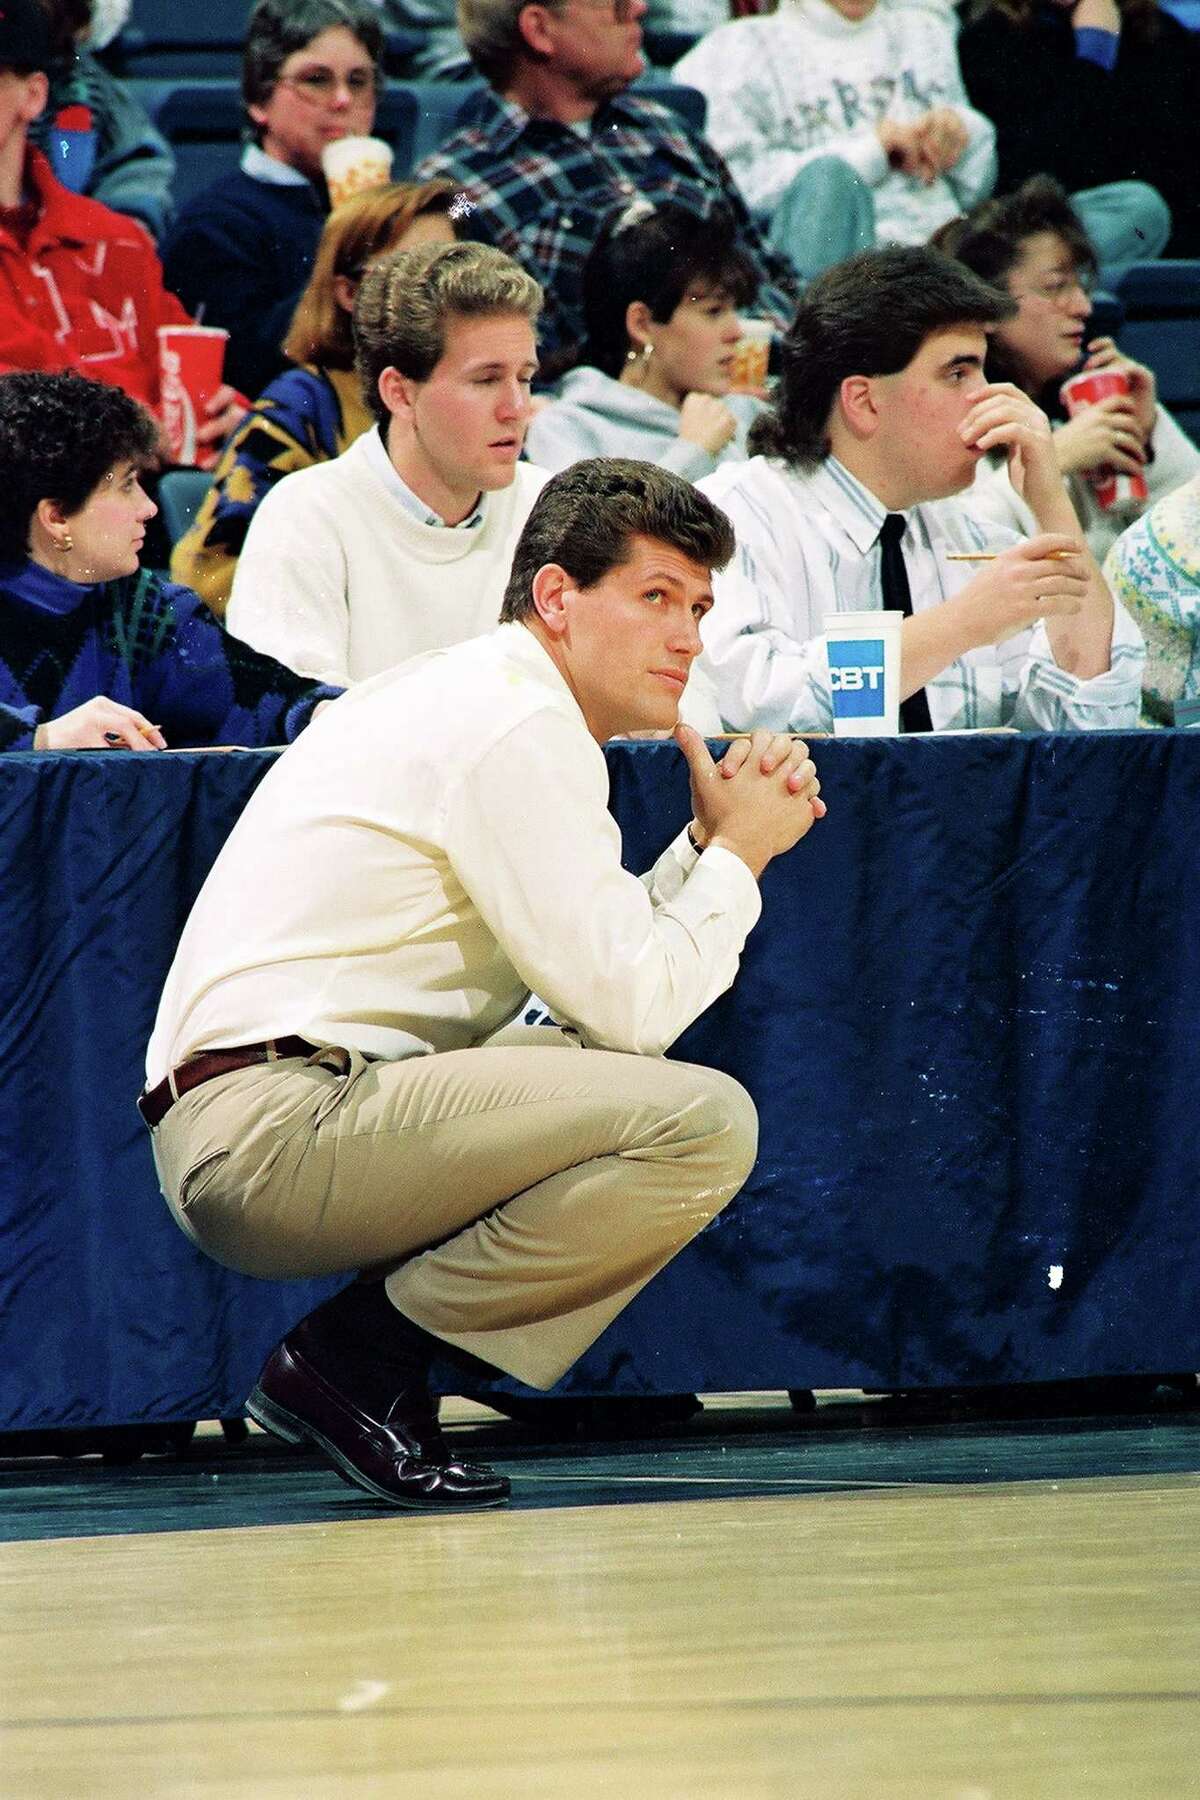 University of Connecticut coach Geno Auriemma watches the action, while crouched on the sideline, Gampel Pavilion, Storrs, CT, 1991. (Photo by Bob Stowell/Gety Images)